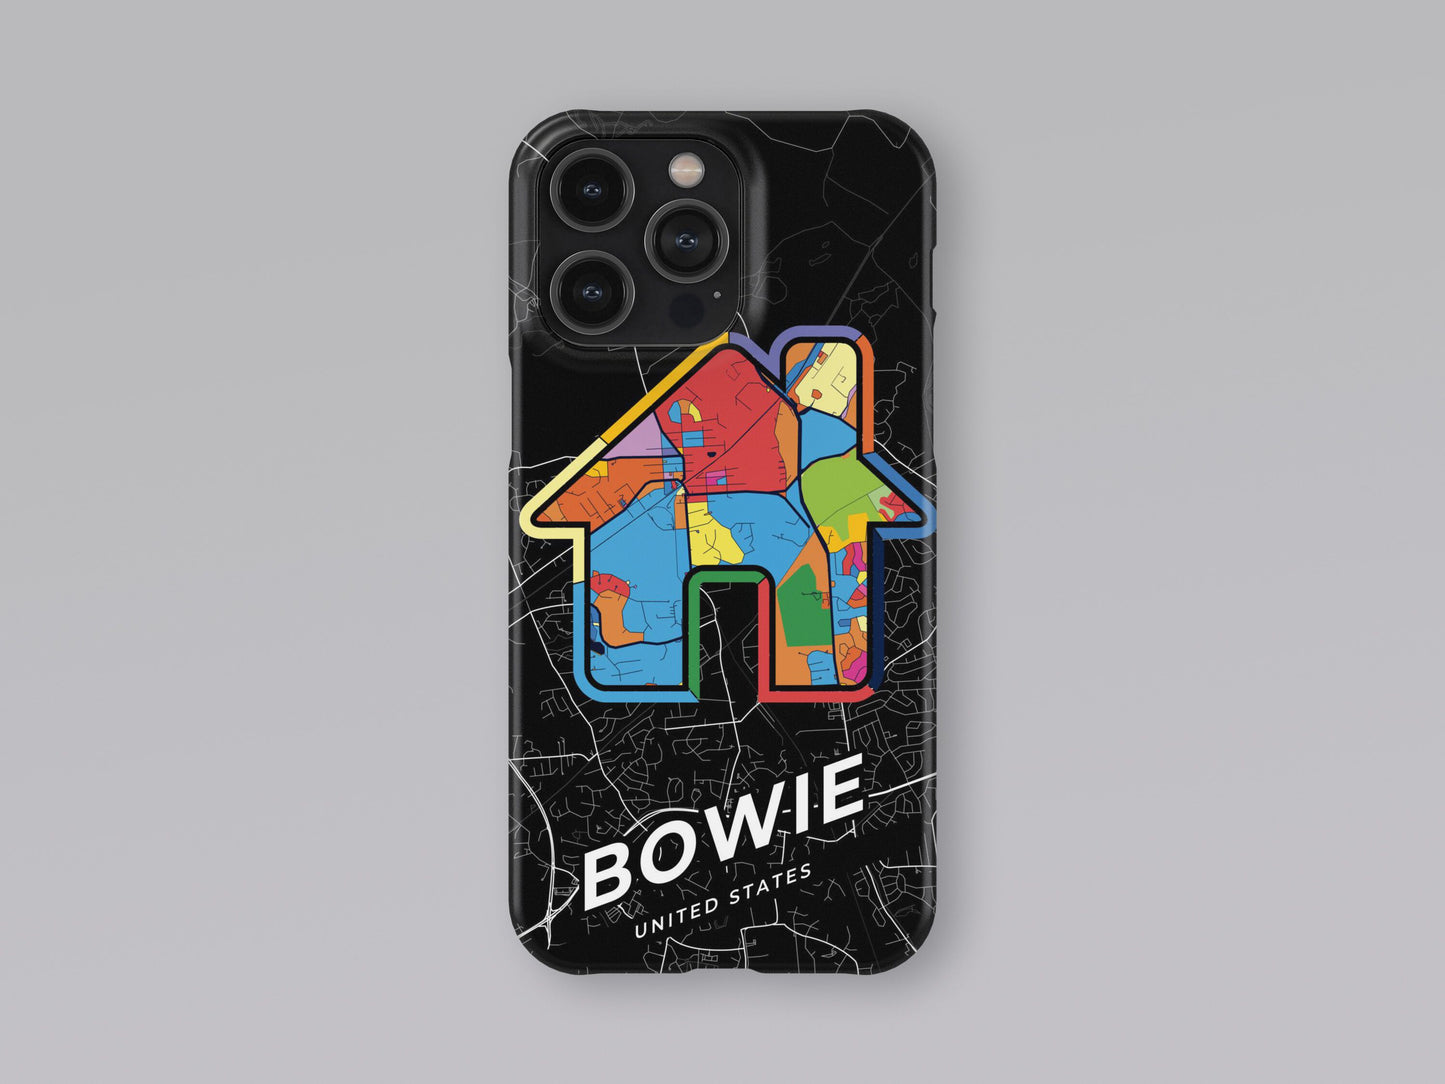 Bowie Maryland slim phone case with colorful icon. Birthday, wedding or housewarming gift. Couple match cases. 3